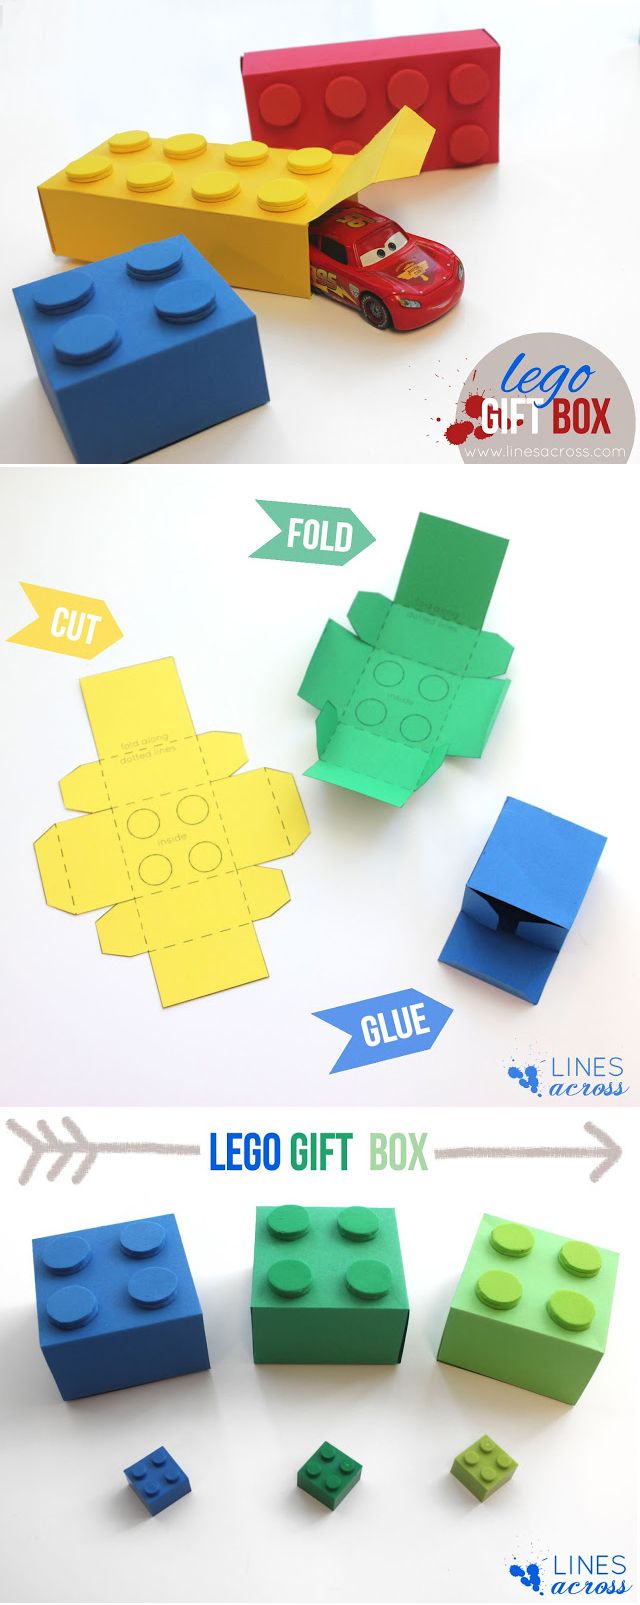 Lego gift box - with free templates from Lines Across